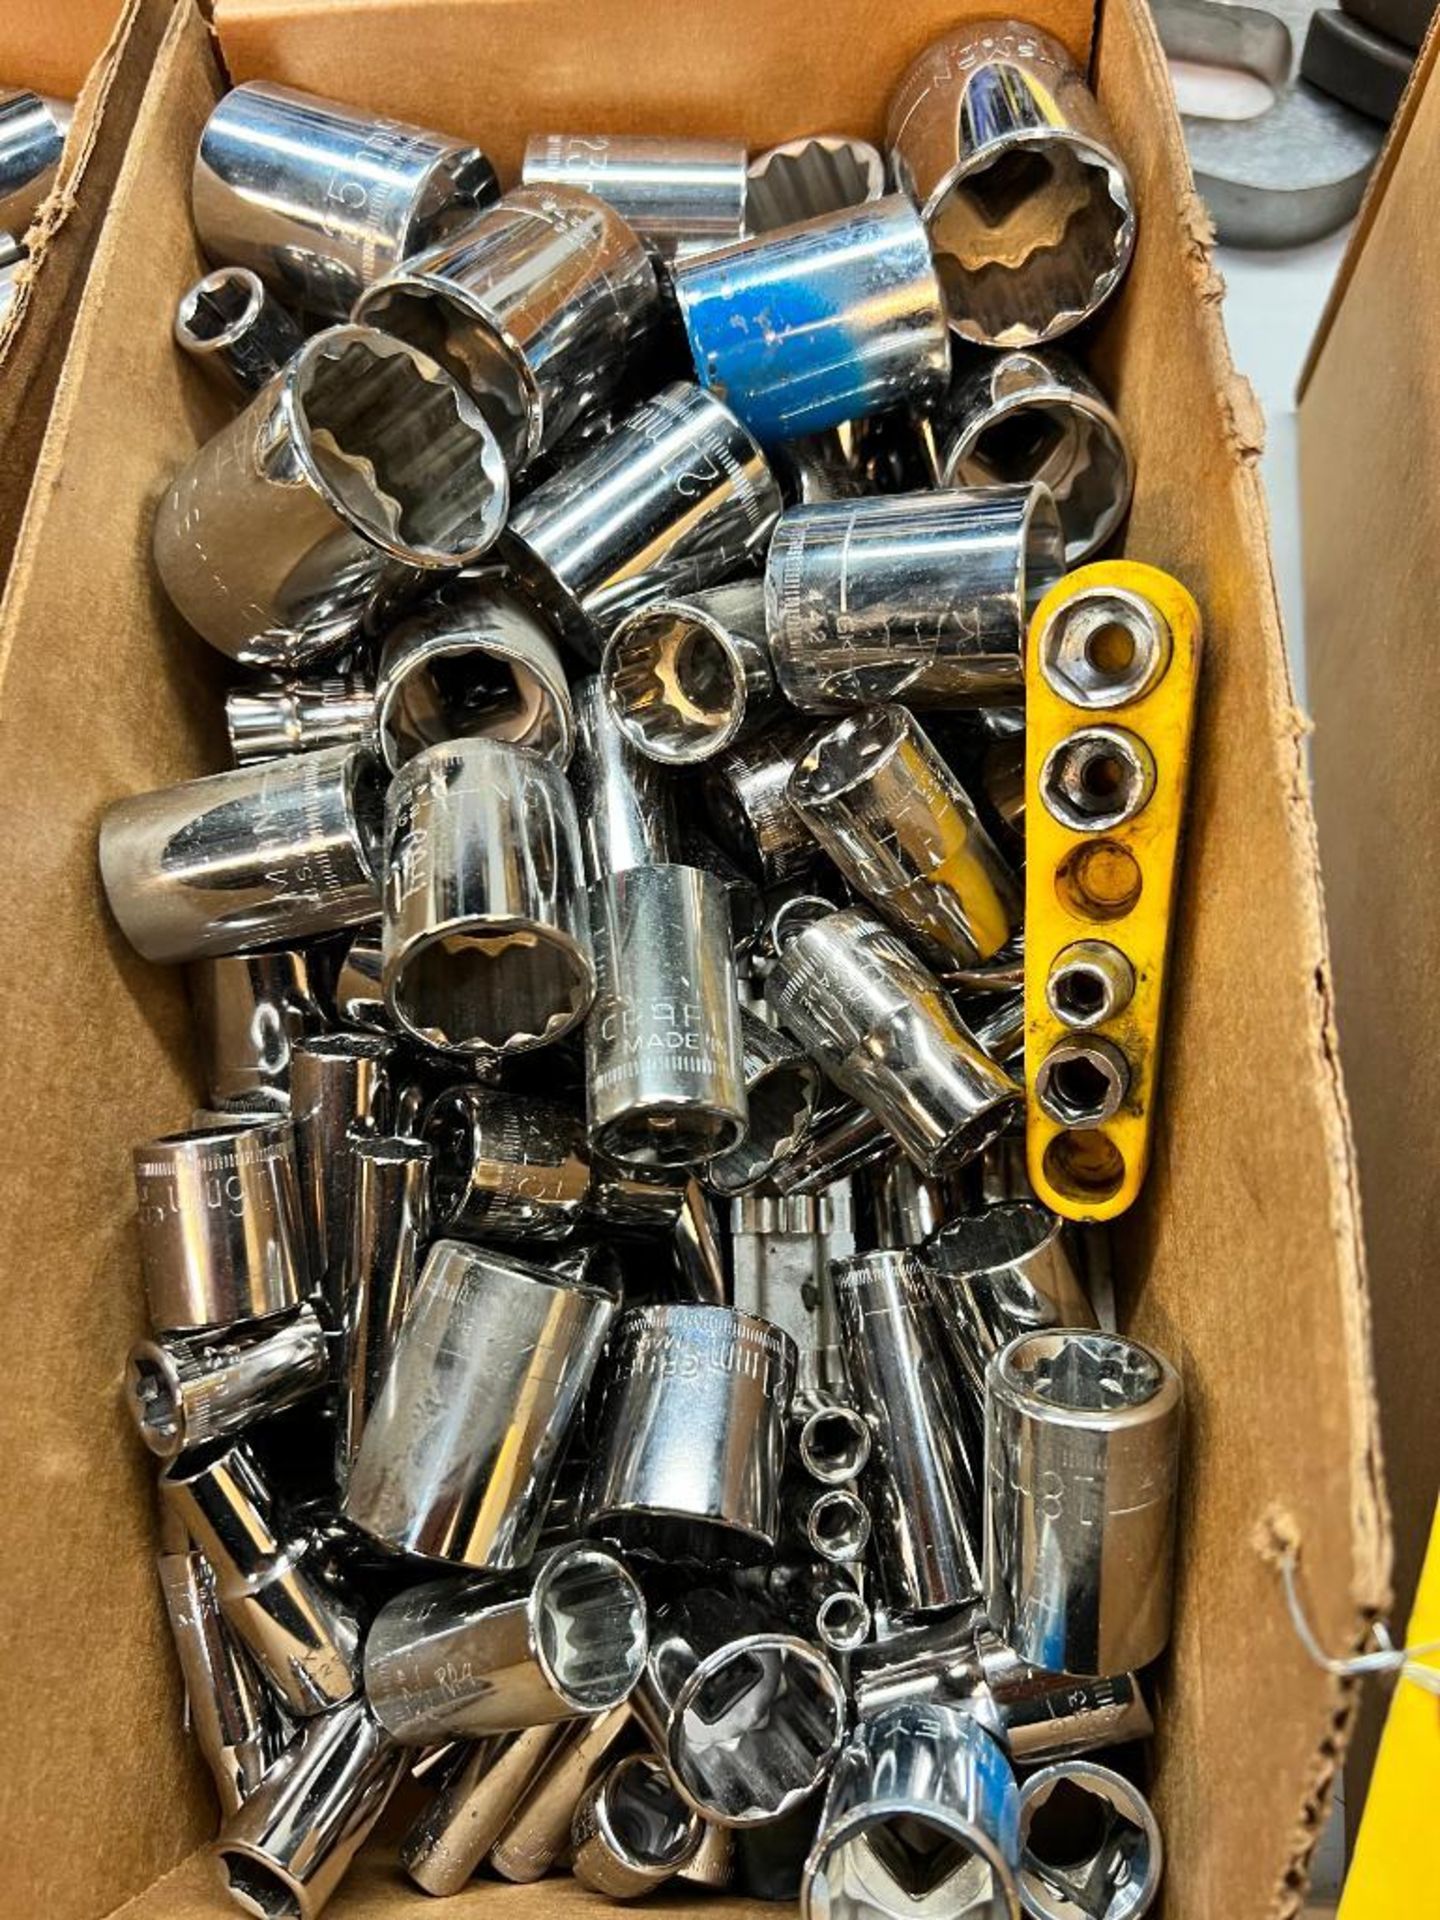 Assorted Size Metric Sockets